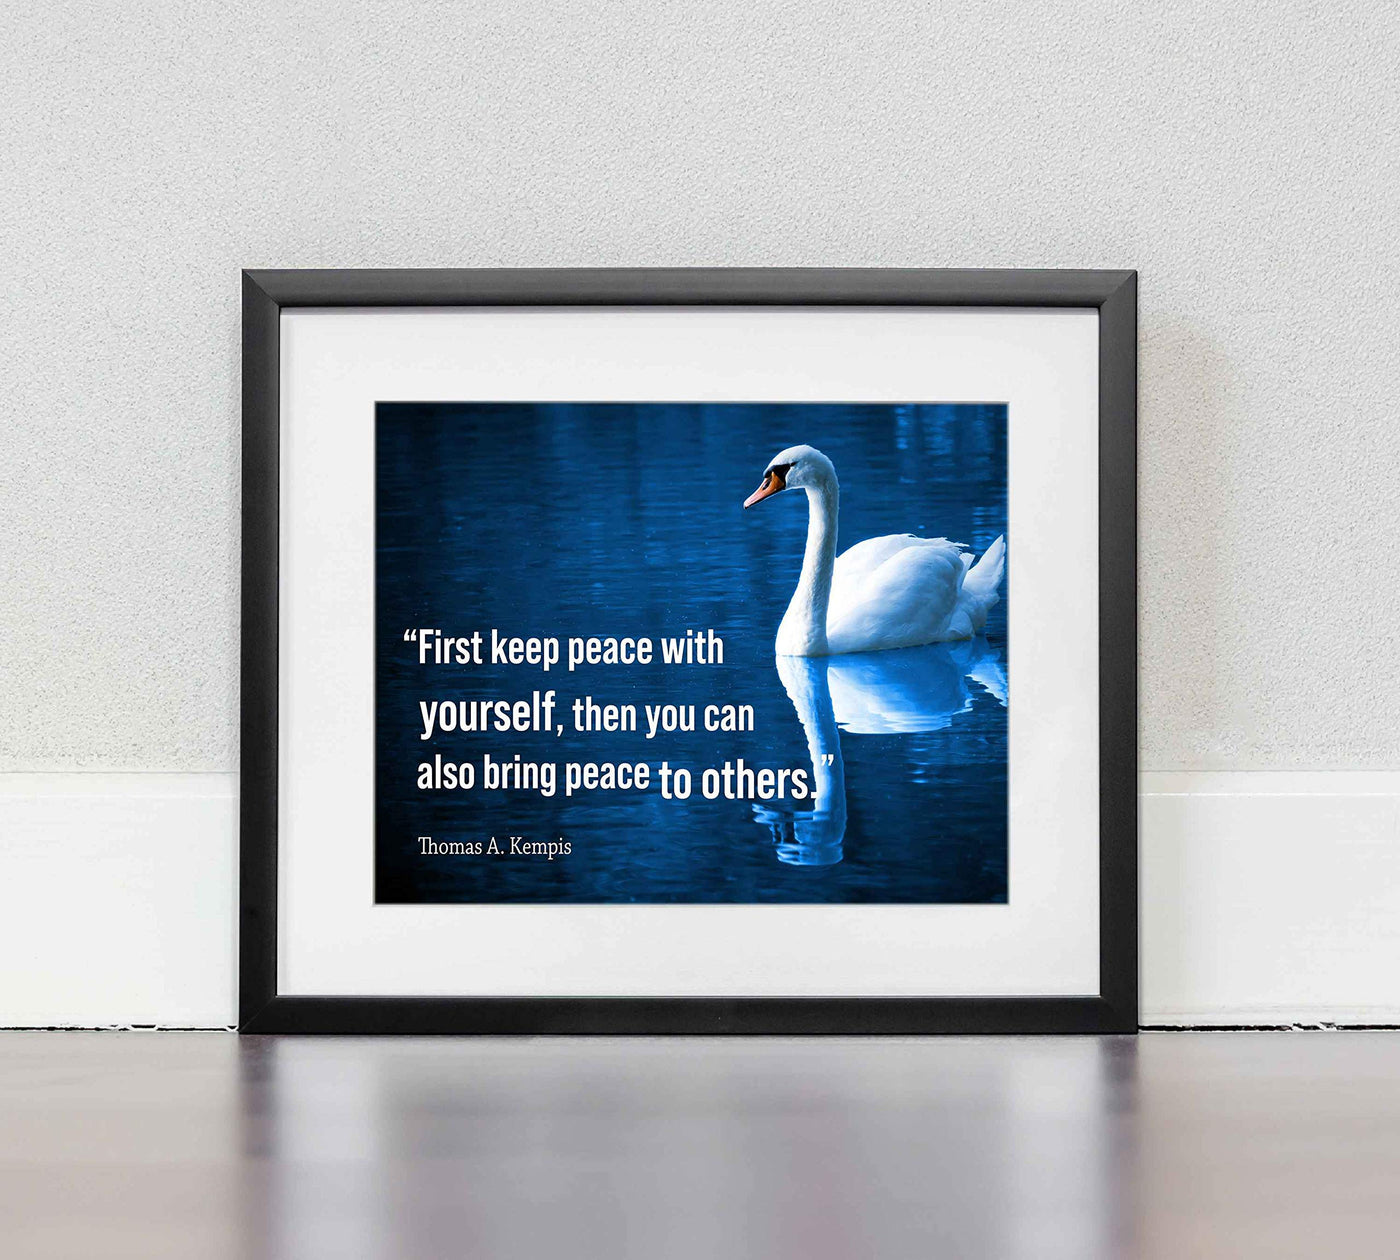 First Keep Peace With Yourself-Thomas A. Kempis Quotes Wall Art. -10 x 8" Inspirational Poster Print with Swan Image-Ready to Frame. Spiritual Home-Office-Church Decor. Great Christian Gift!